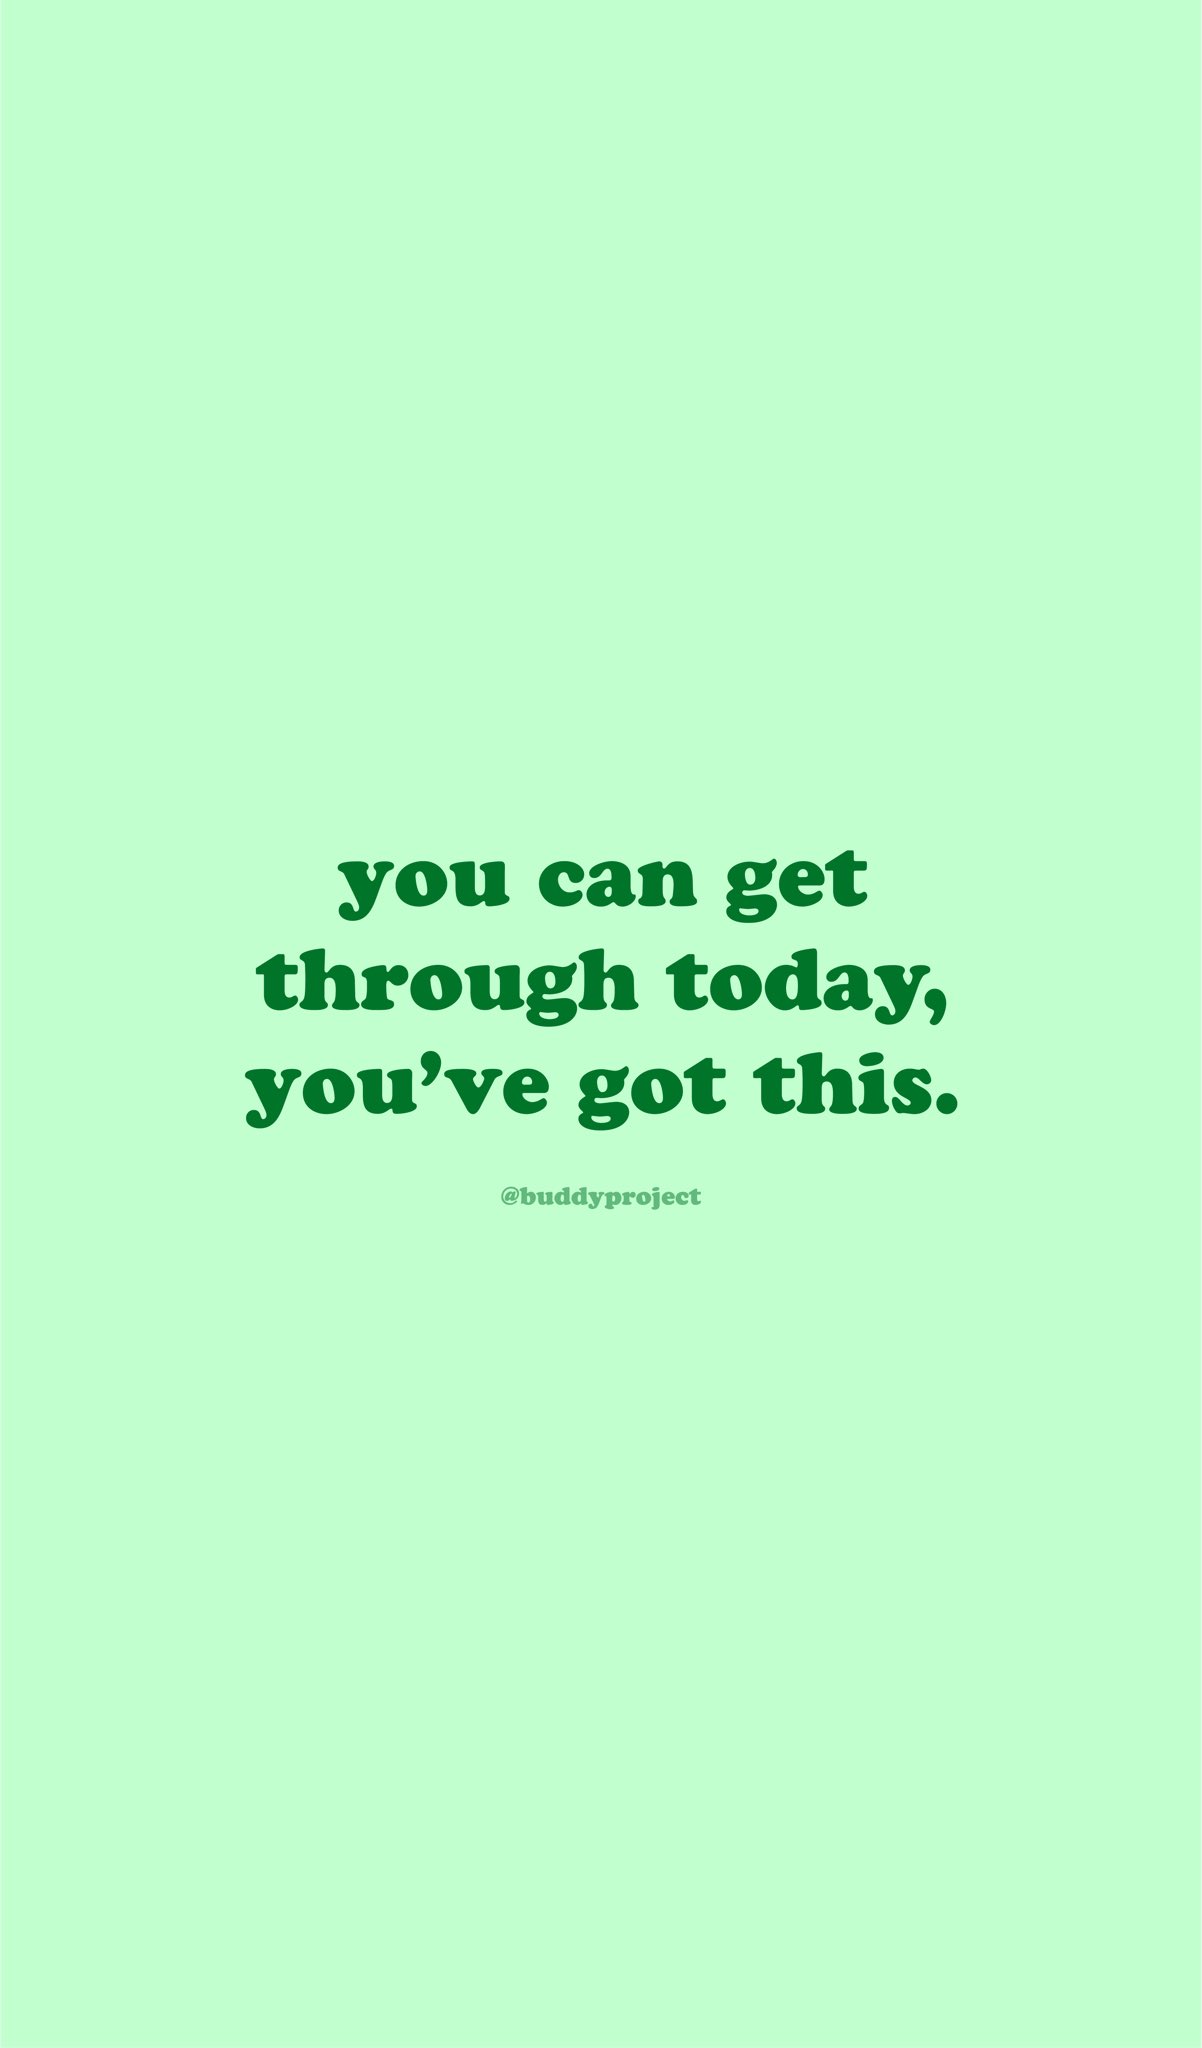 Buddy Project For The Fourth Week Of The Year We Want To Remind You That You Can Get Through Today You Ve Got This We Hope Seeing This Simple Yet Effective